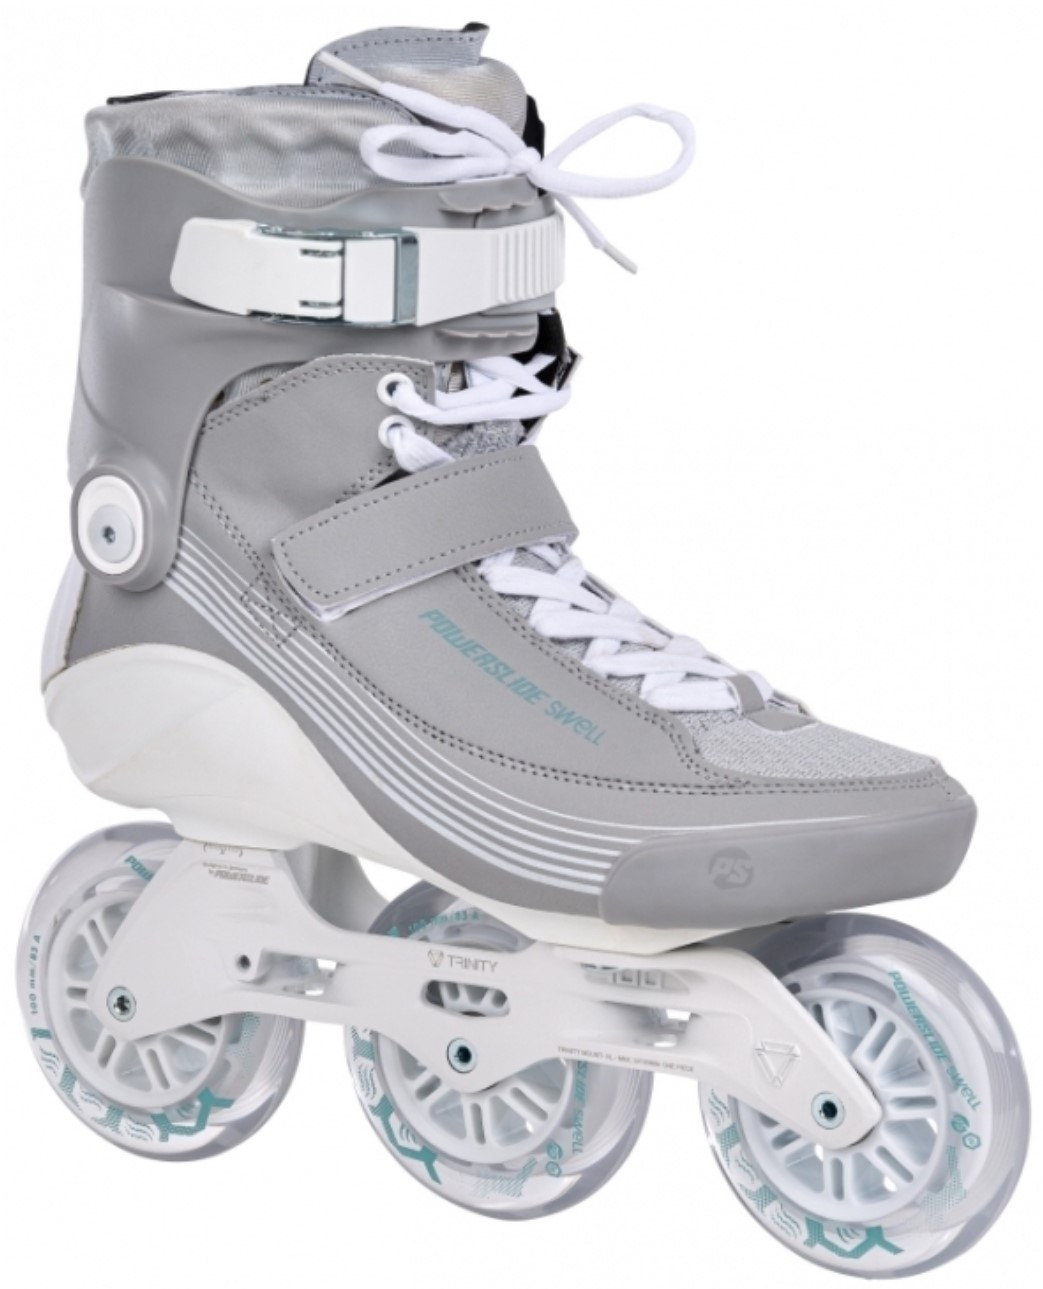 Powerslide Swell Glacier Lake 100 3D Adapt skate with three wheels of 100 mm and a Trinity frame